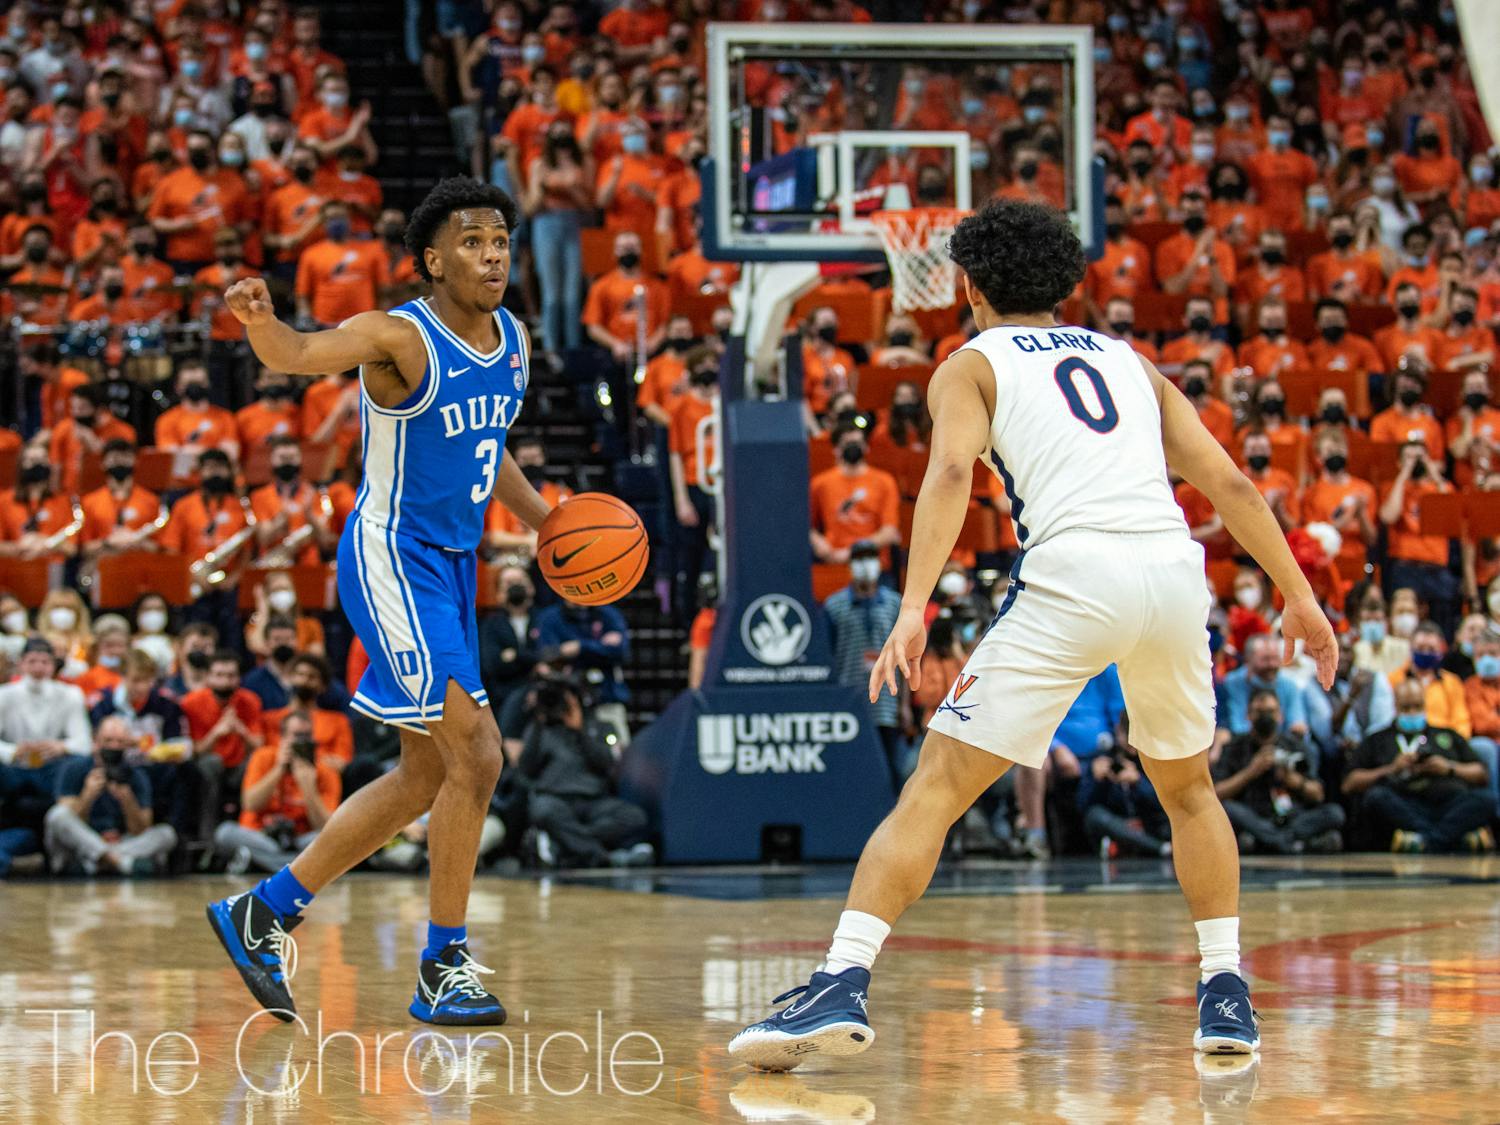 Jeremy Roach led Duke with 15 points in Wednesday night's win.